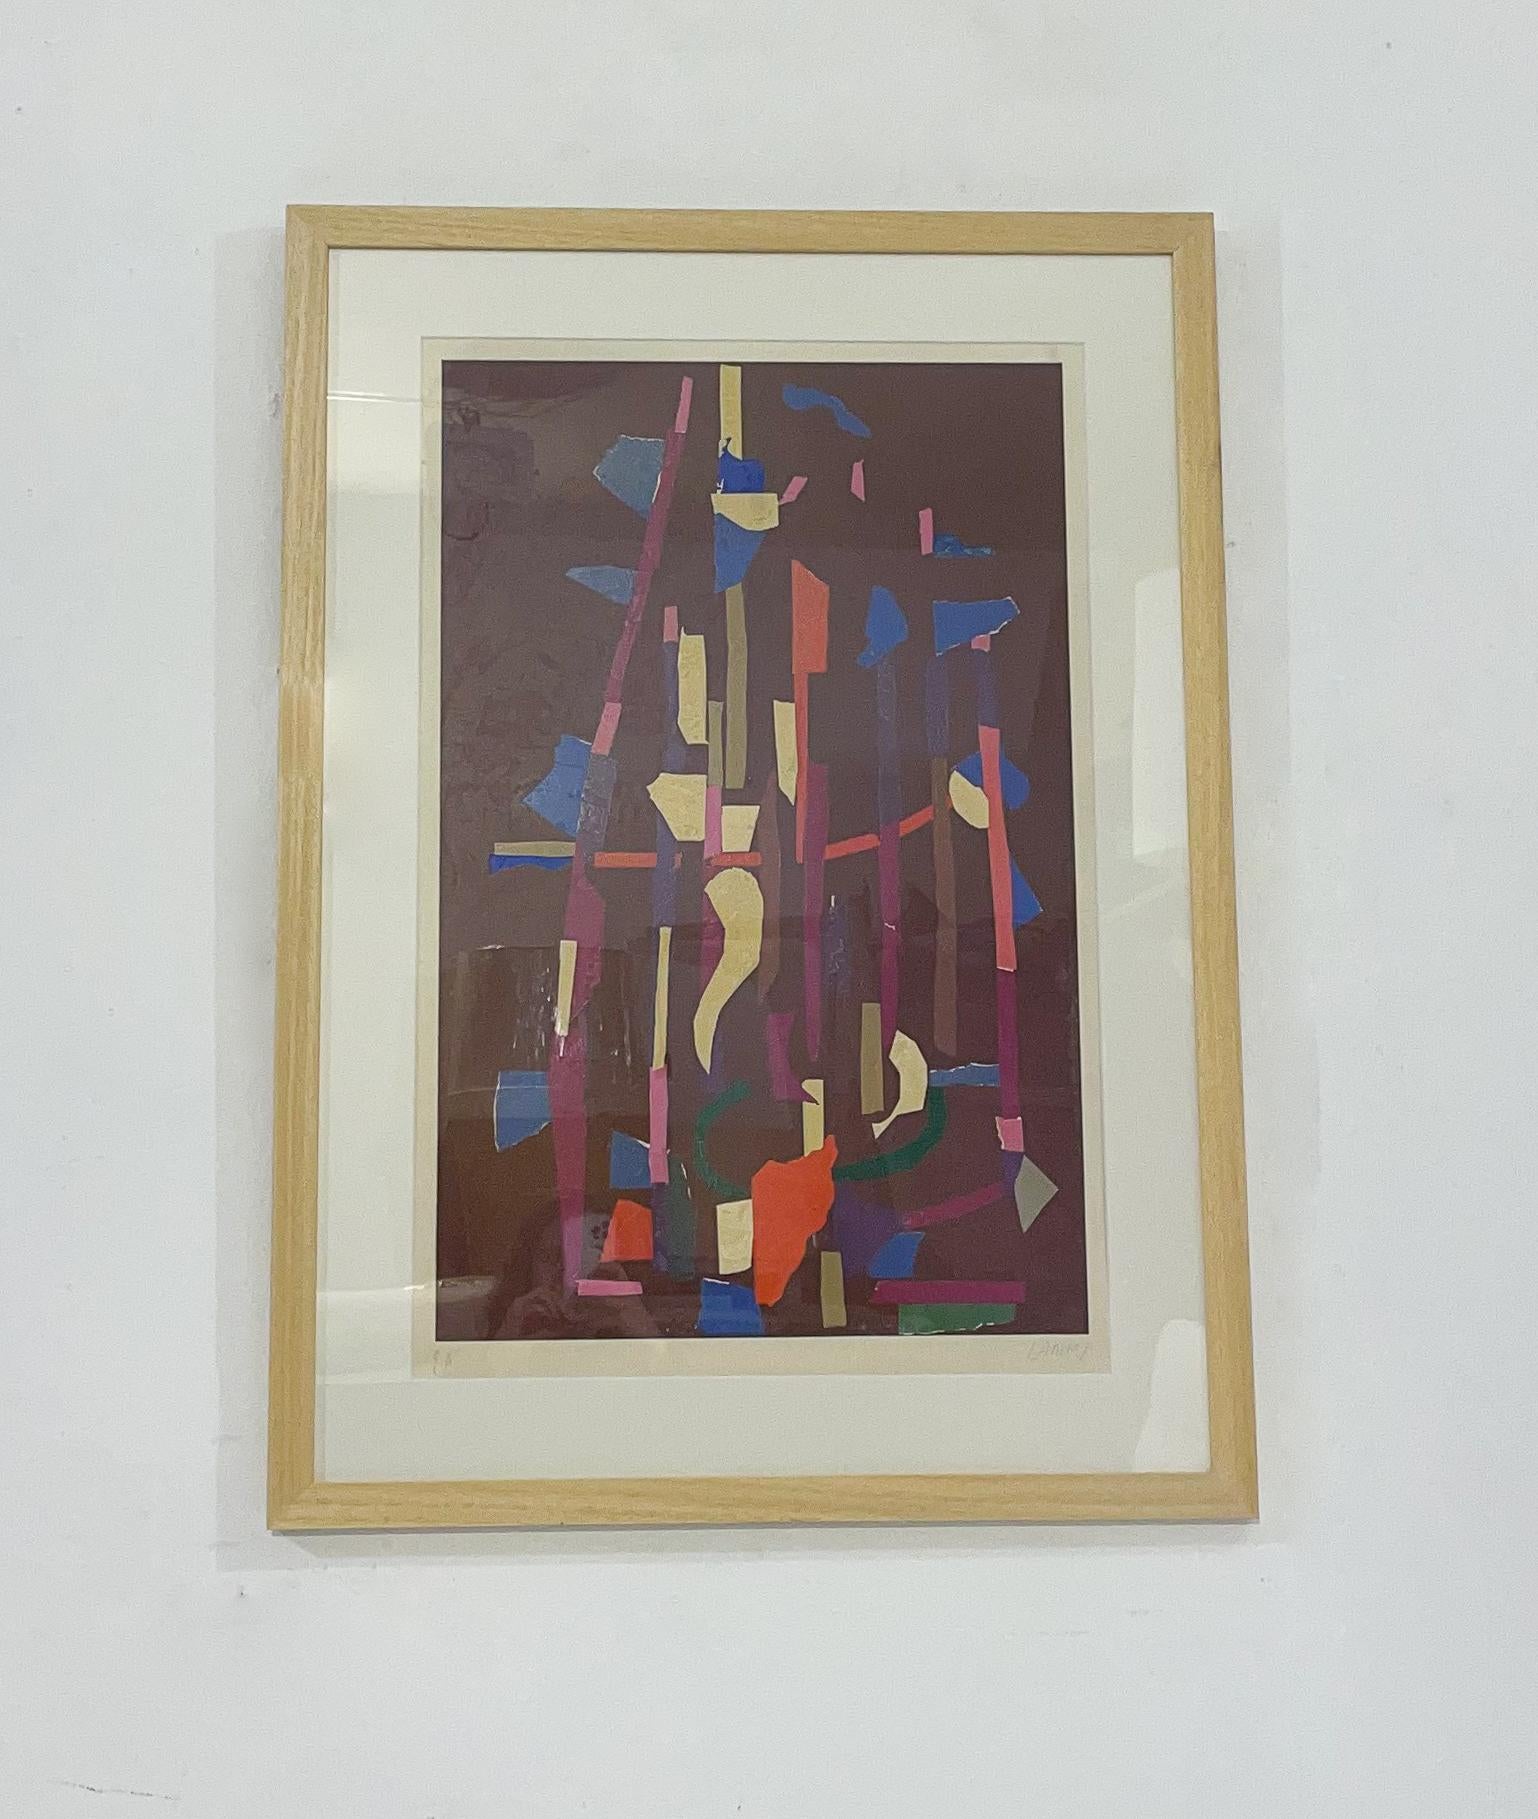 Mid-Century Modern Framed Lithography by André Lanskoy, 1970s - Signed For Sale